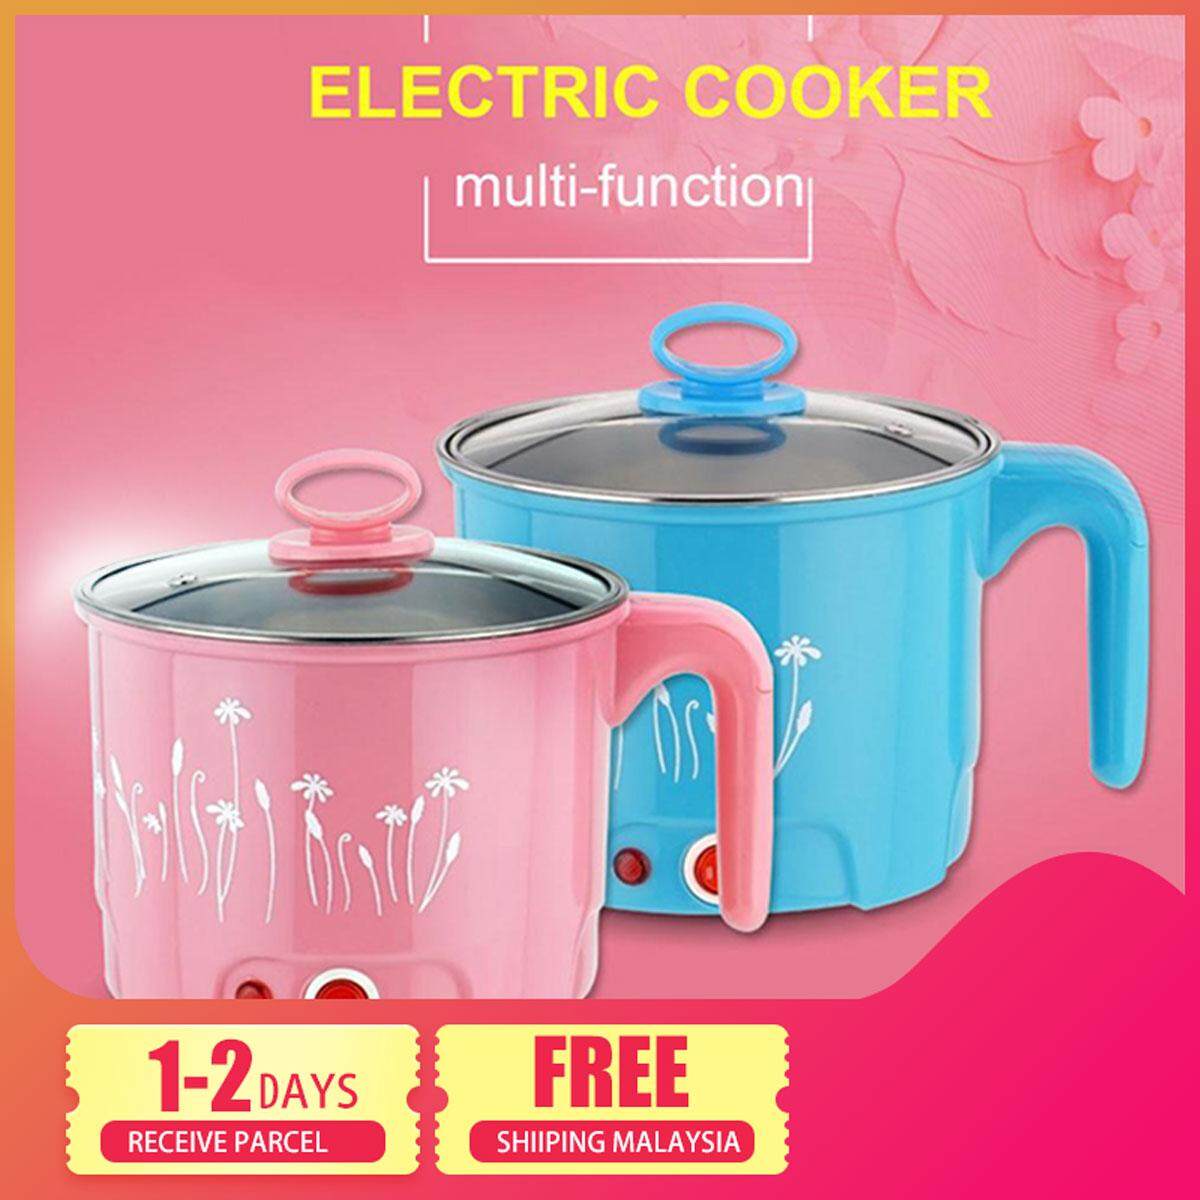 DELLY 2 LAYERS MULTI FUNCTION HEATER STEAMER MINI COOKER 1.8L STAINLESS STEEL -BLUE SSFH-B